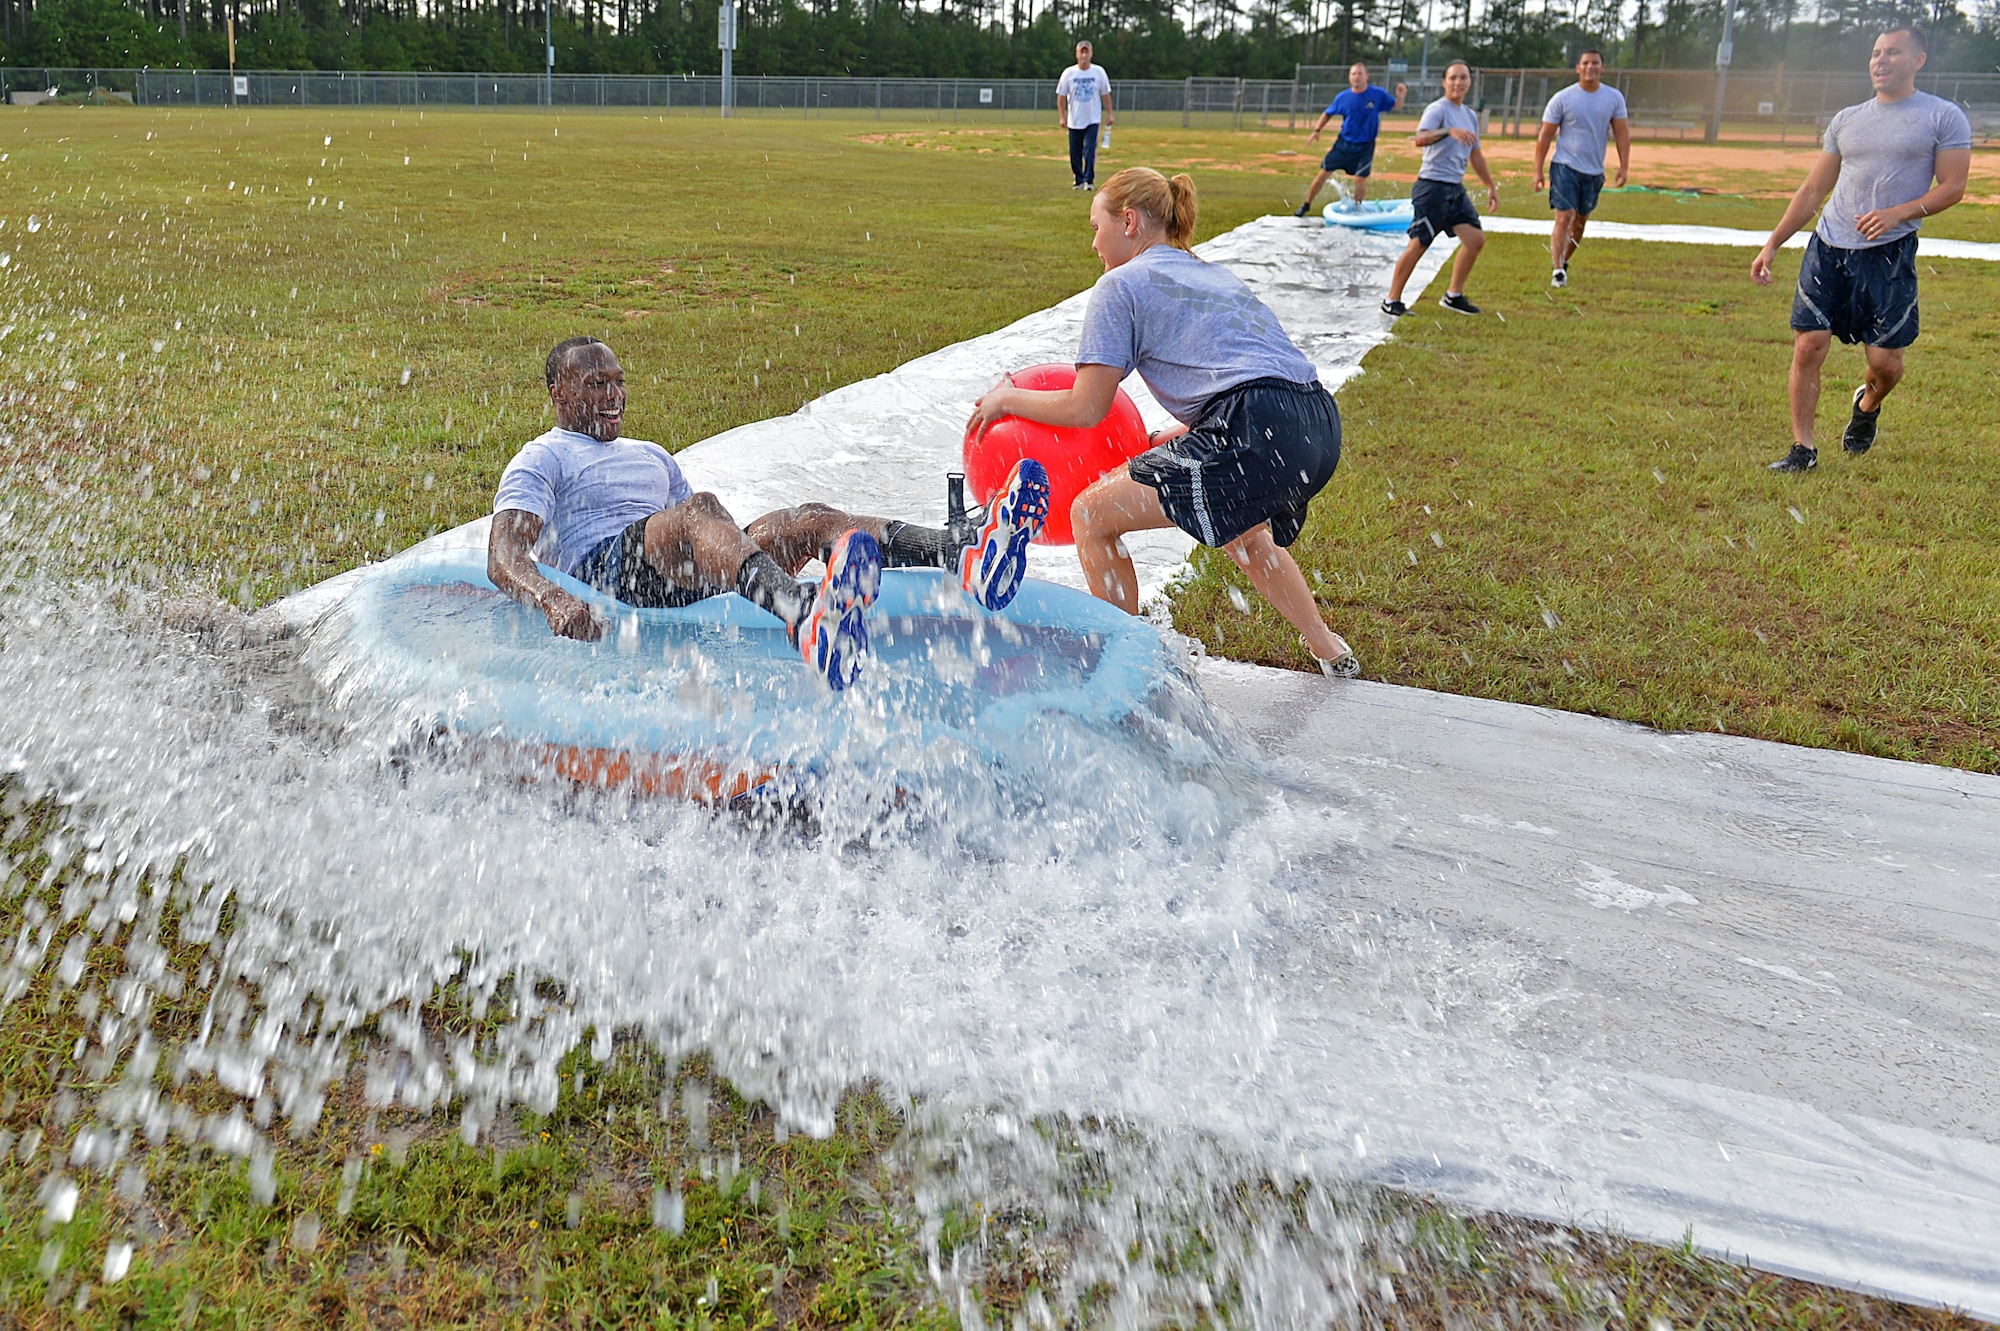 U.S. Air Force Senior Airman Dominique McNeal, 20th Communications Squadron unit deployment manager, splashes into a pool during a Comprehensive Airman Fitness sports day at Shaw Air Force Base, S.C., Aug. 10, 2016. Airmen assigned to the 20th Fighter Wing participated in a number of sports including softball and slip-and-slide kickball. (U.S. Air Force photo by Airman 1st Class Christopher Maldonado)